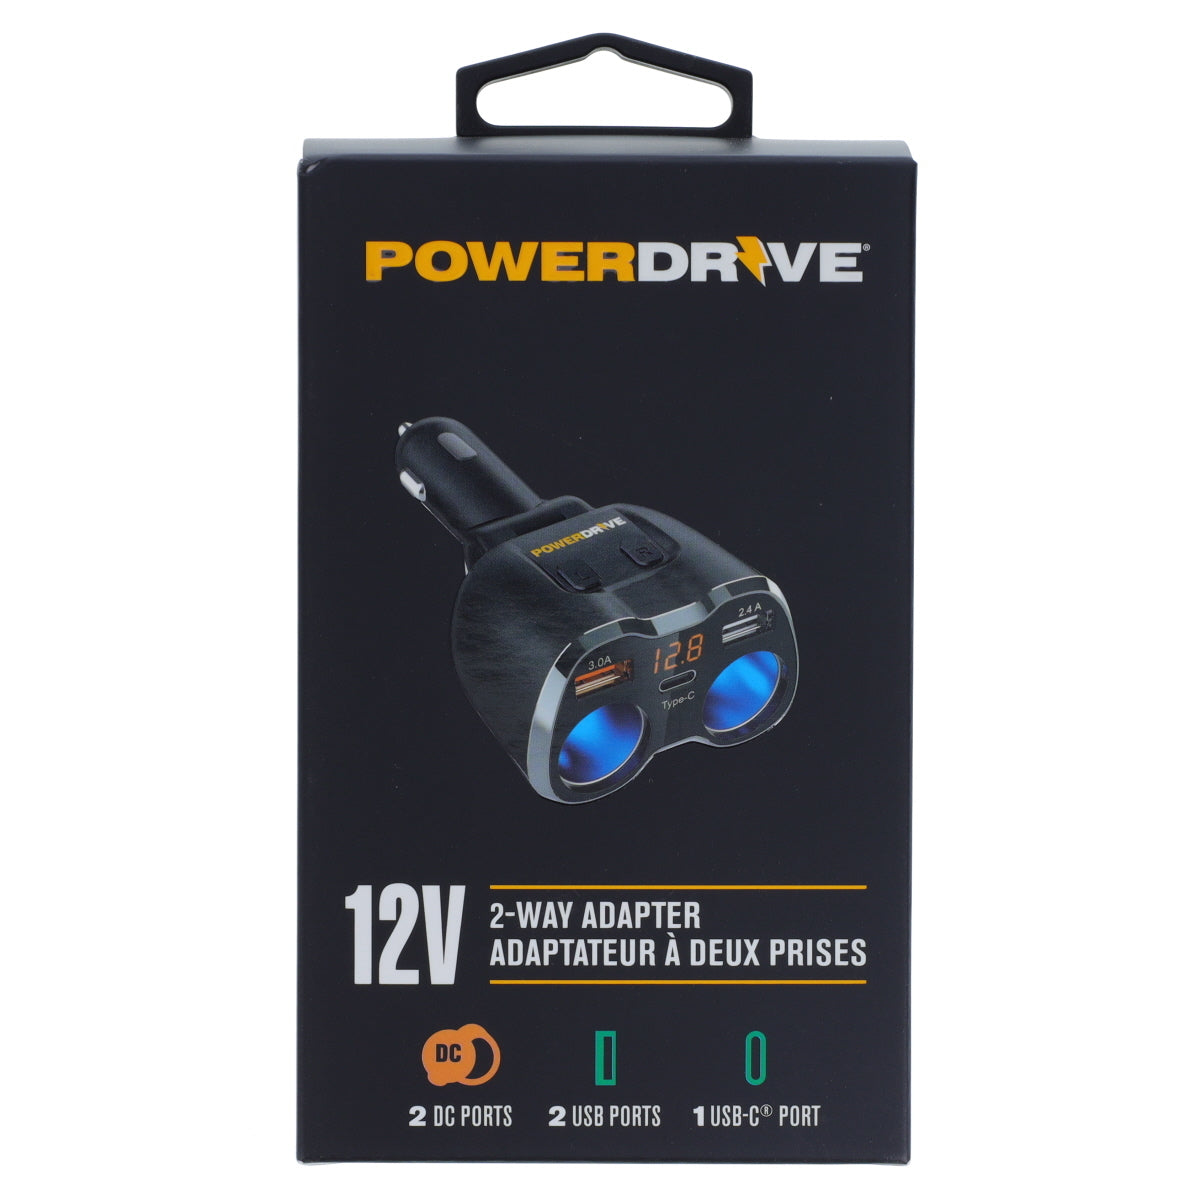 PowerDrive 12V 2-Way Adapter with USB and USB-C Ports LED Display 80W Output Cigarette Socket Splitter Adapter Black